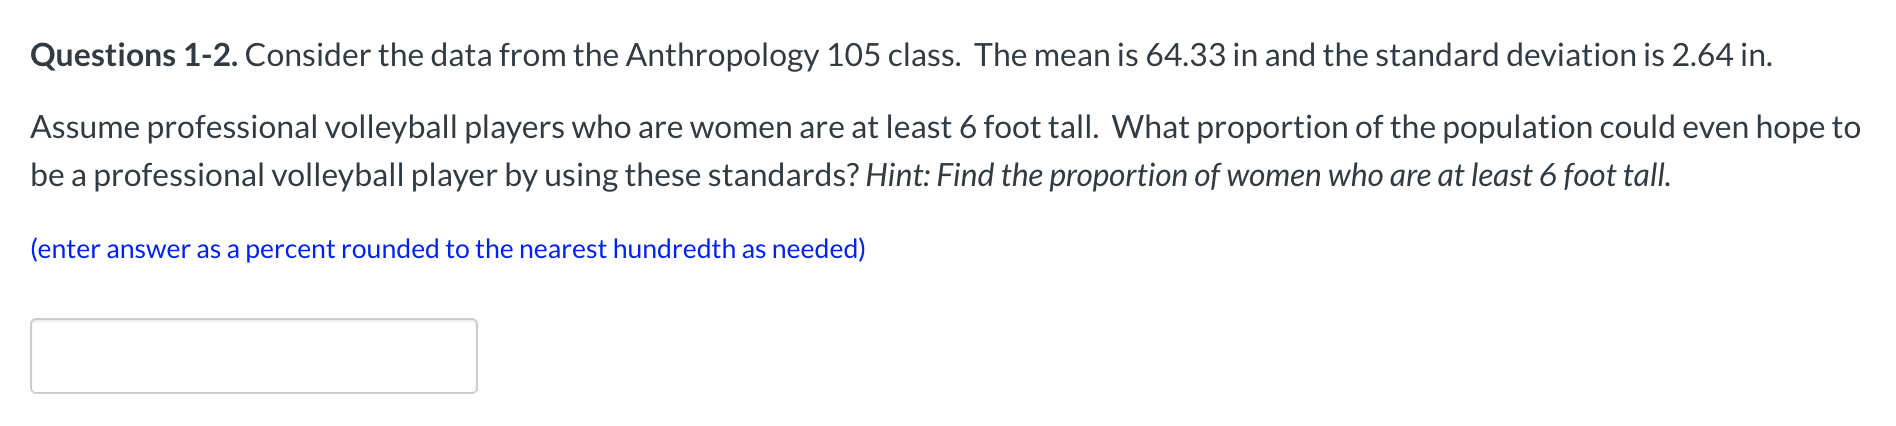 Questions 1-2. Consider the data from the Anthropology 105 class. The mean is 64.33 in and the standard deviation is 2.64 in.
Assume professional volleyball players who are women are at least 6 foot tall. What proportion of the population could even hope to
be a professional volleyball player by using these standards? Hint: Find the proportion of women who are at least 6 foot tall.
(enter answer as a percent rounded to the nearest hundredth as needed)
